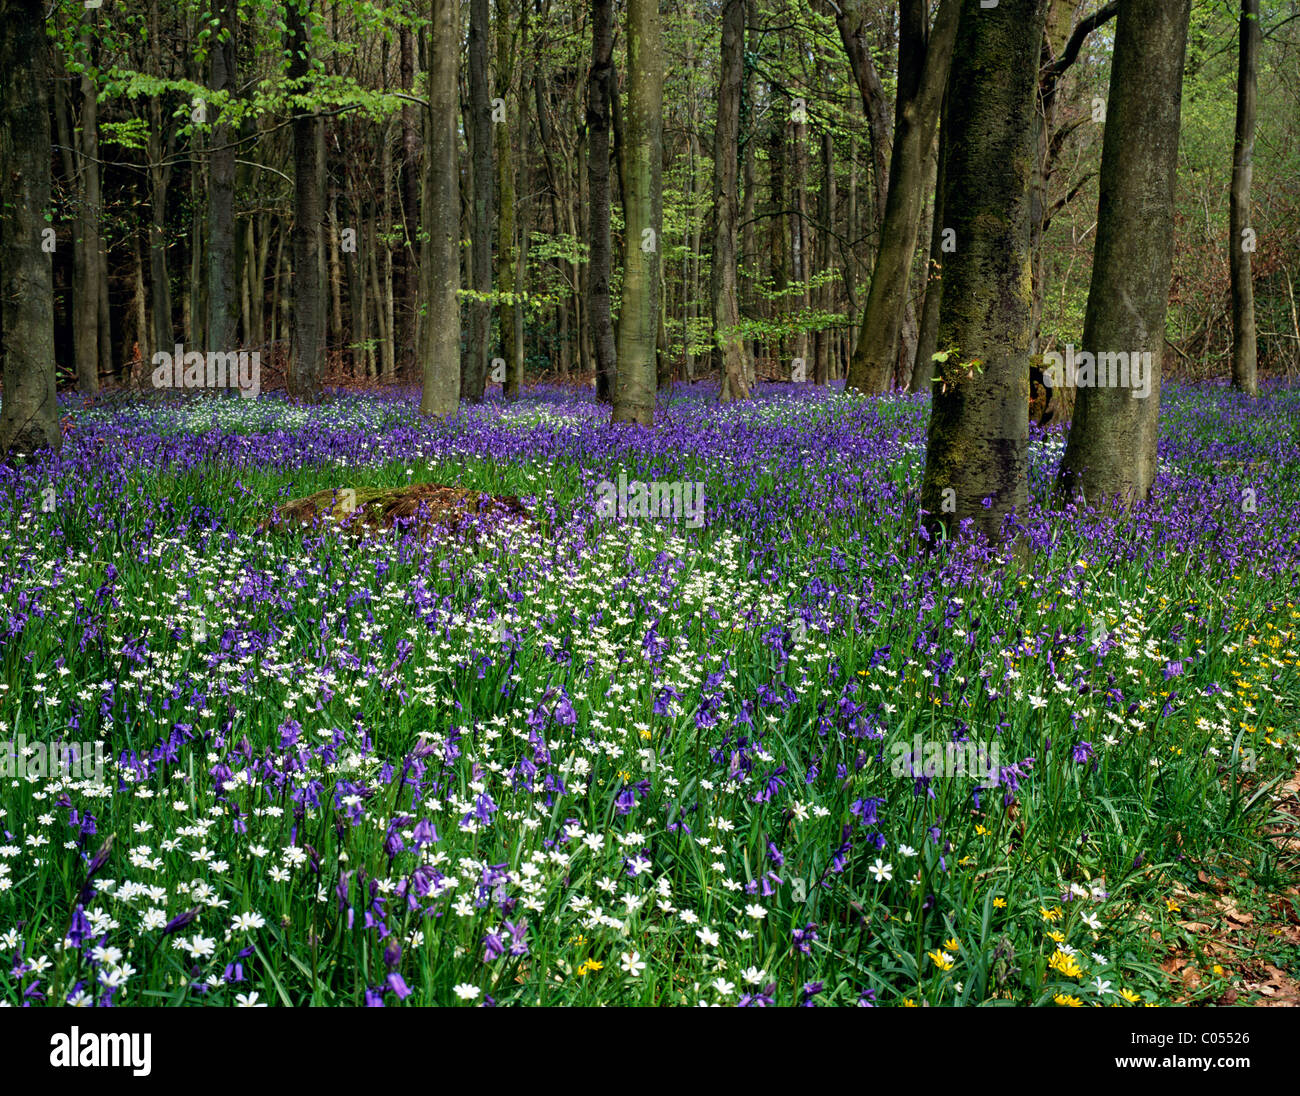 Greater stitchwort (stellaria holostea) growing amongst bluebells (hyacinthoides non-scripta) in a woodland in Wiltshire, UK. Stock Photo